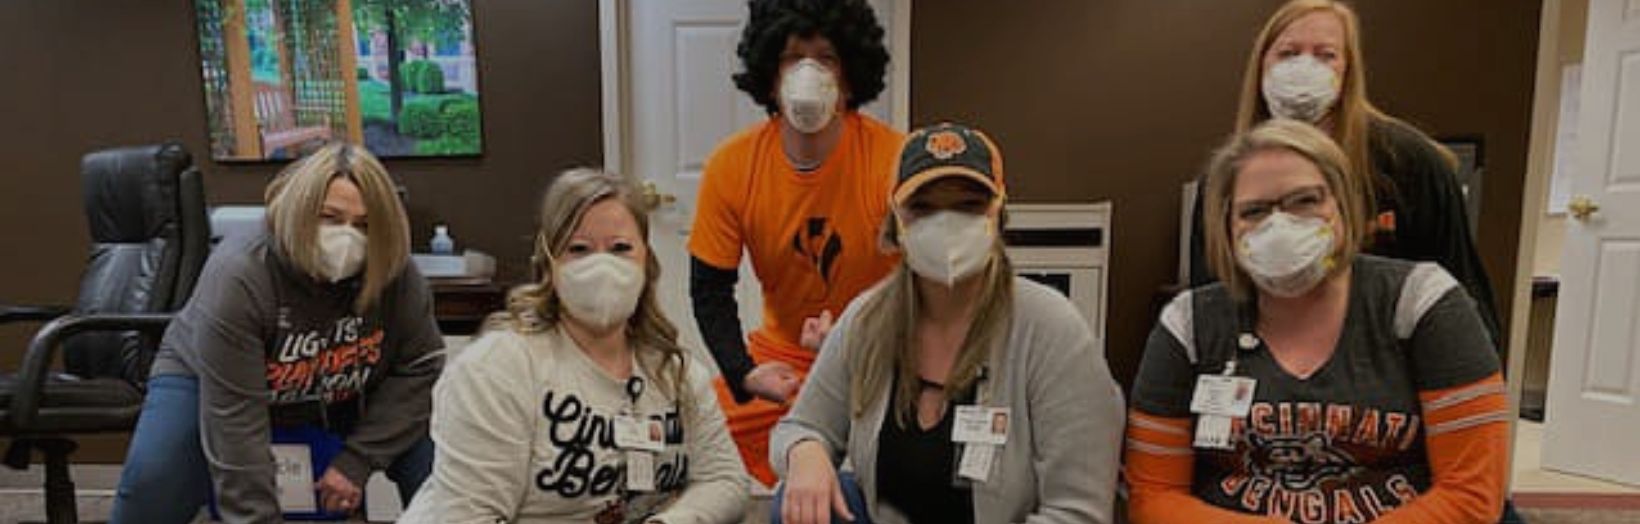 employees wearing ID badges pose together all are wearing masks